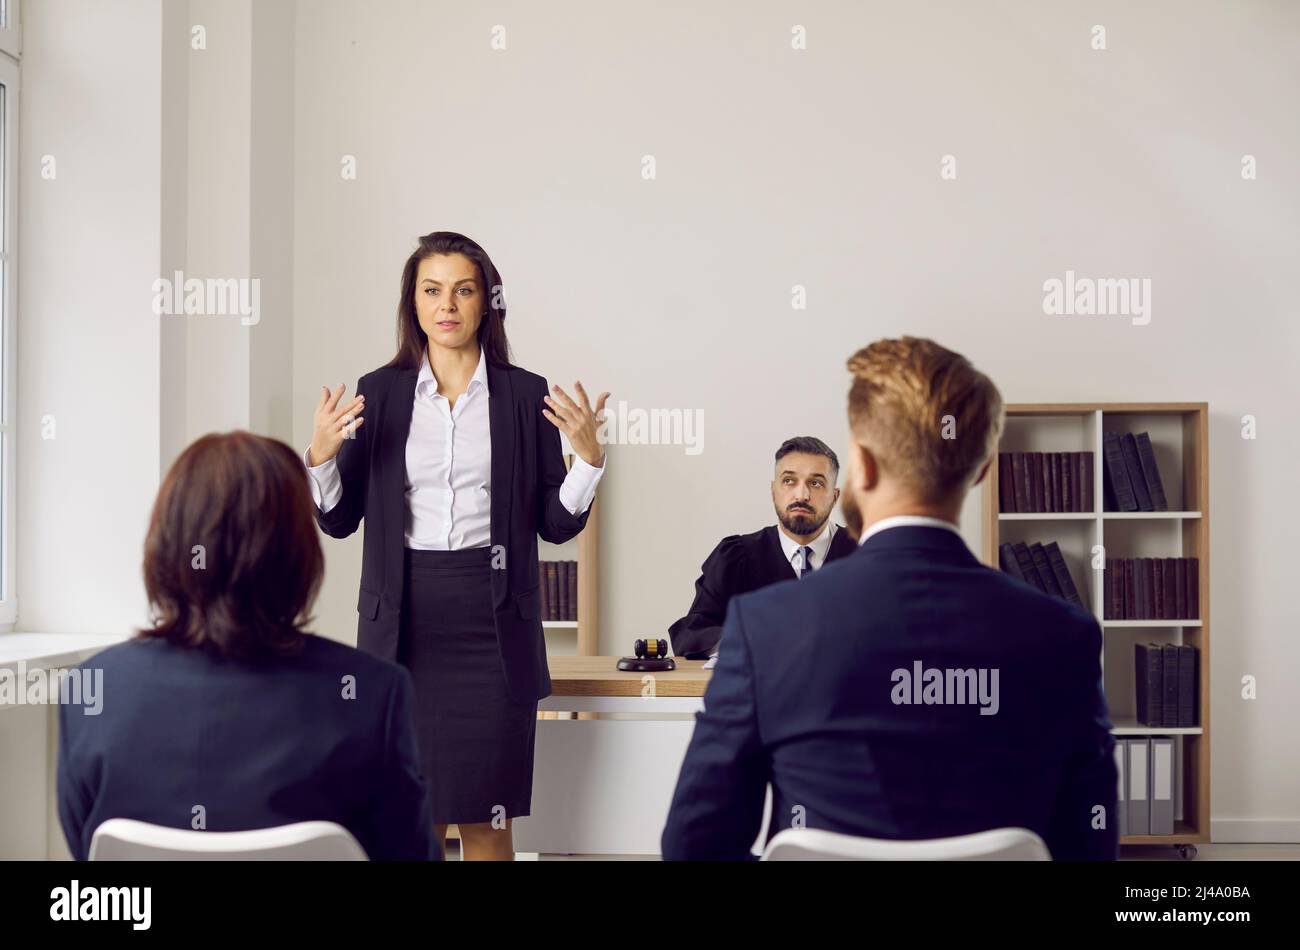 Defense lawyer or plaintiff attorney making a speech during a court trial hearing Stock Photo